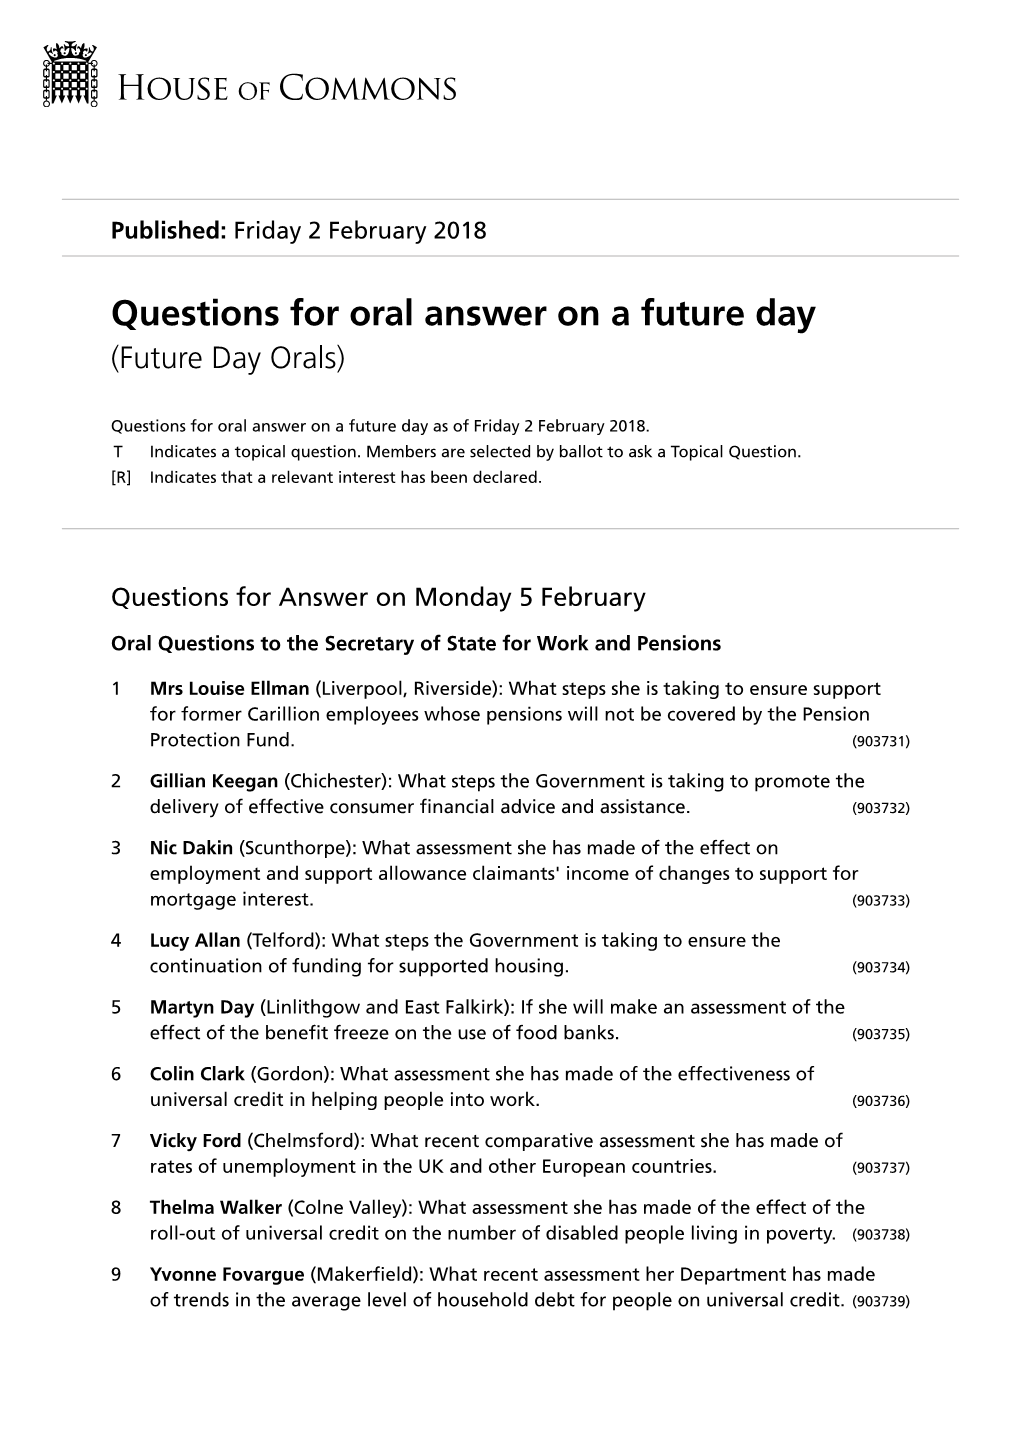 Questions for Oral Answer on a Future Day (Future Day Orals)